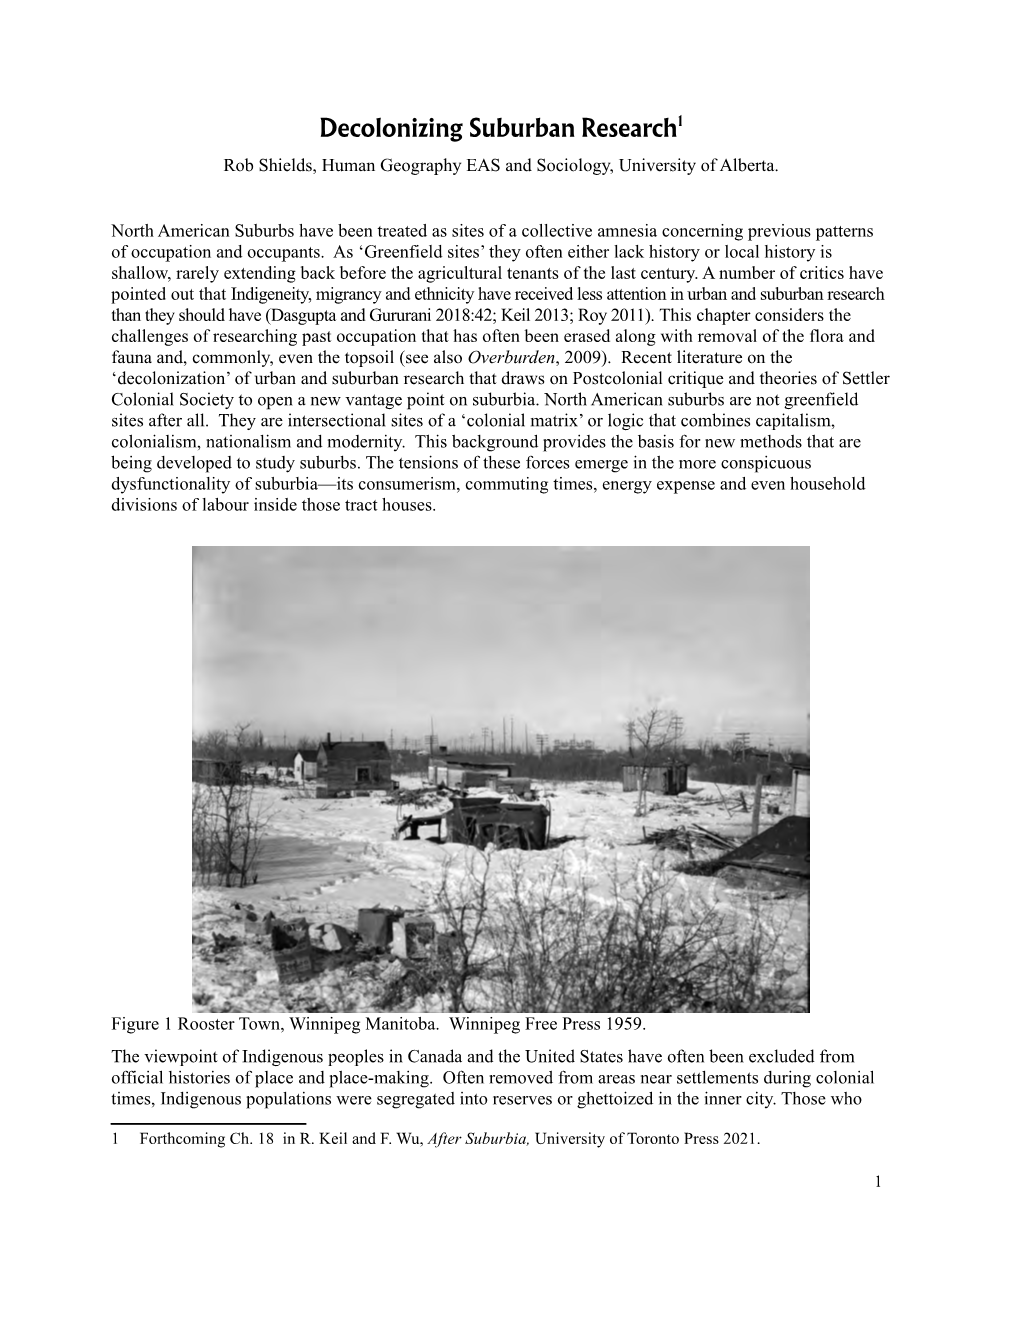 Shields-Decolonizing Suburban Research-Aag.Docx